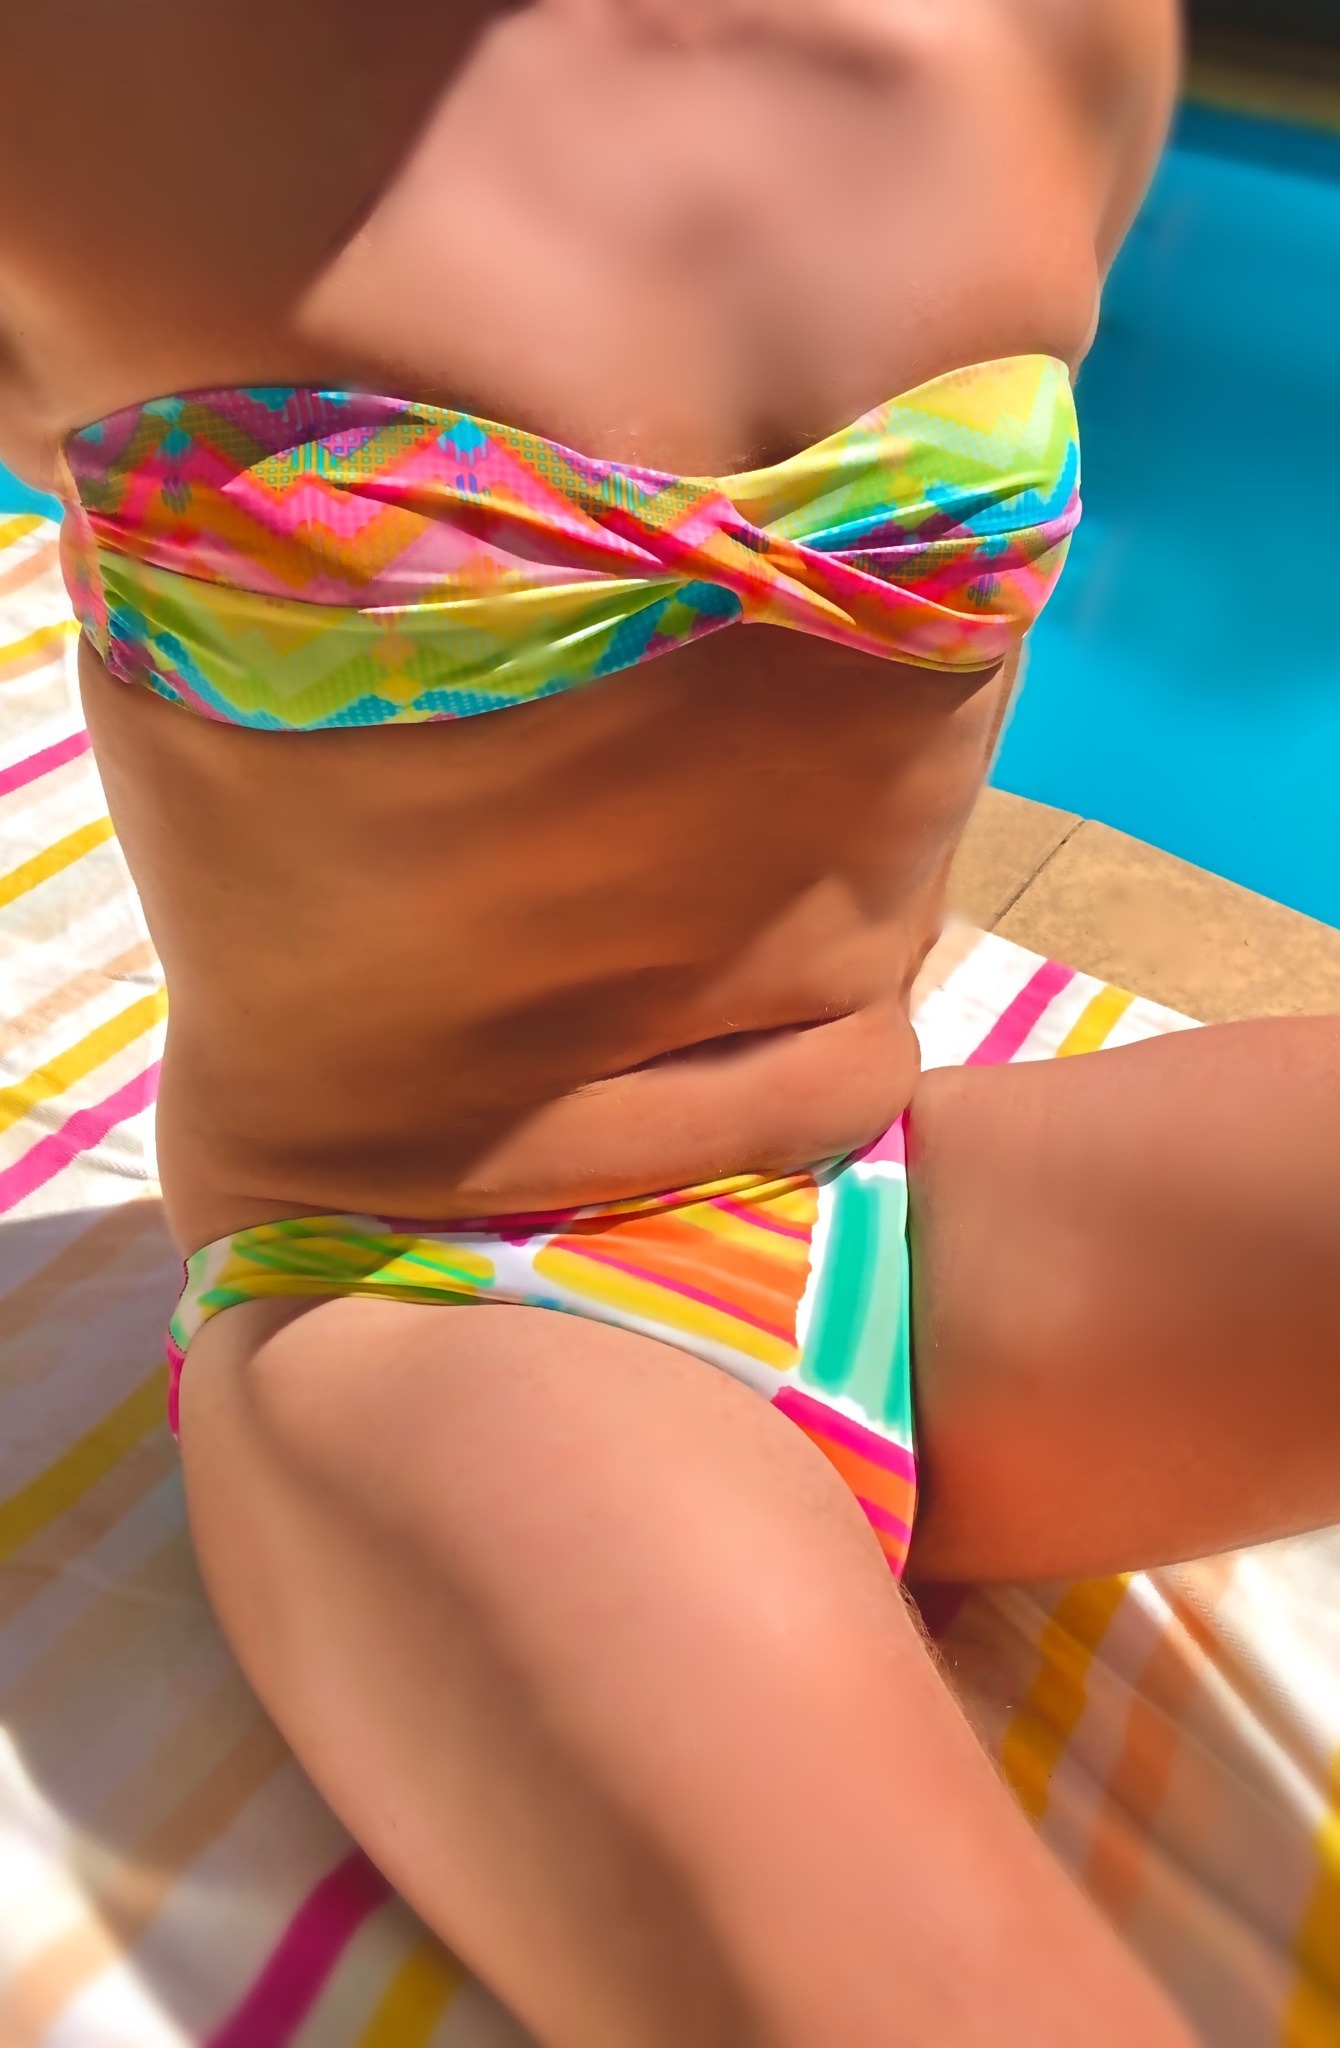 vitamin-sea-for-me:I just love how colorful this bikini isI’d love to know if you